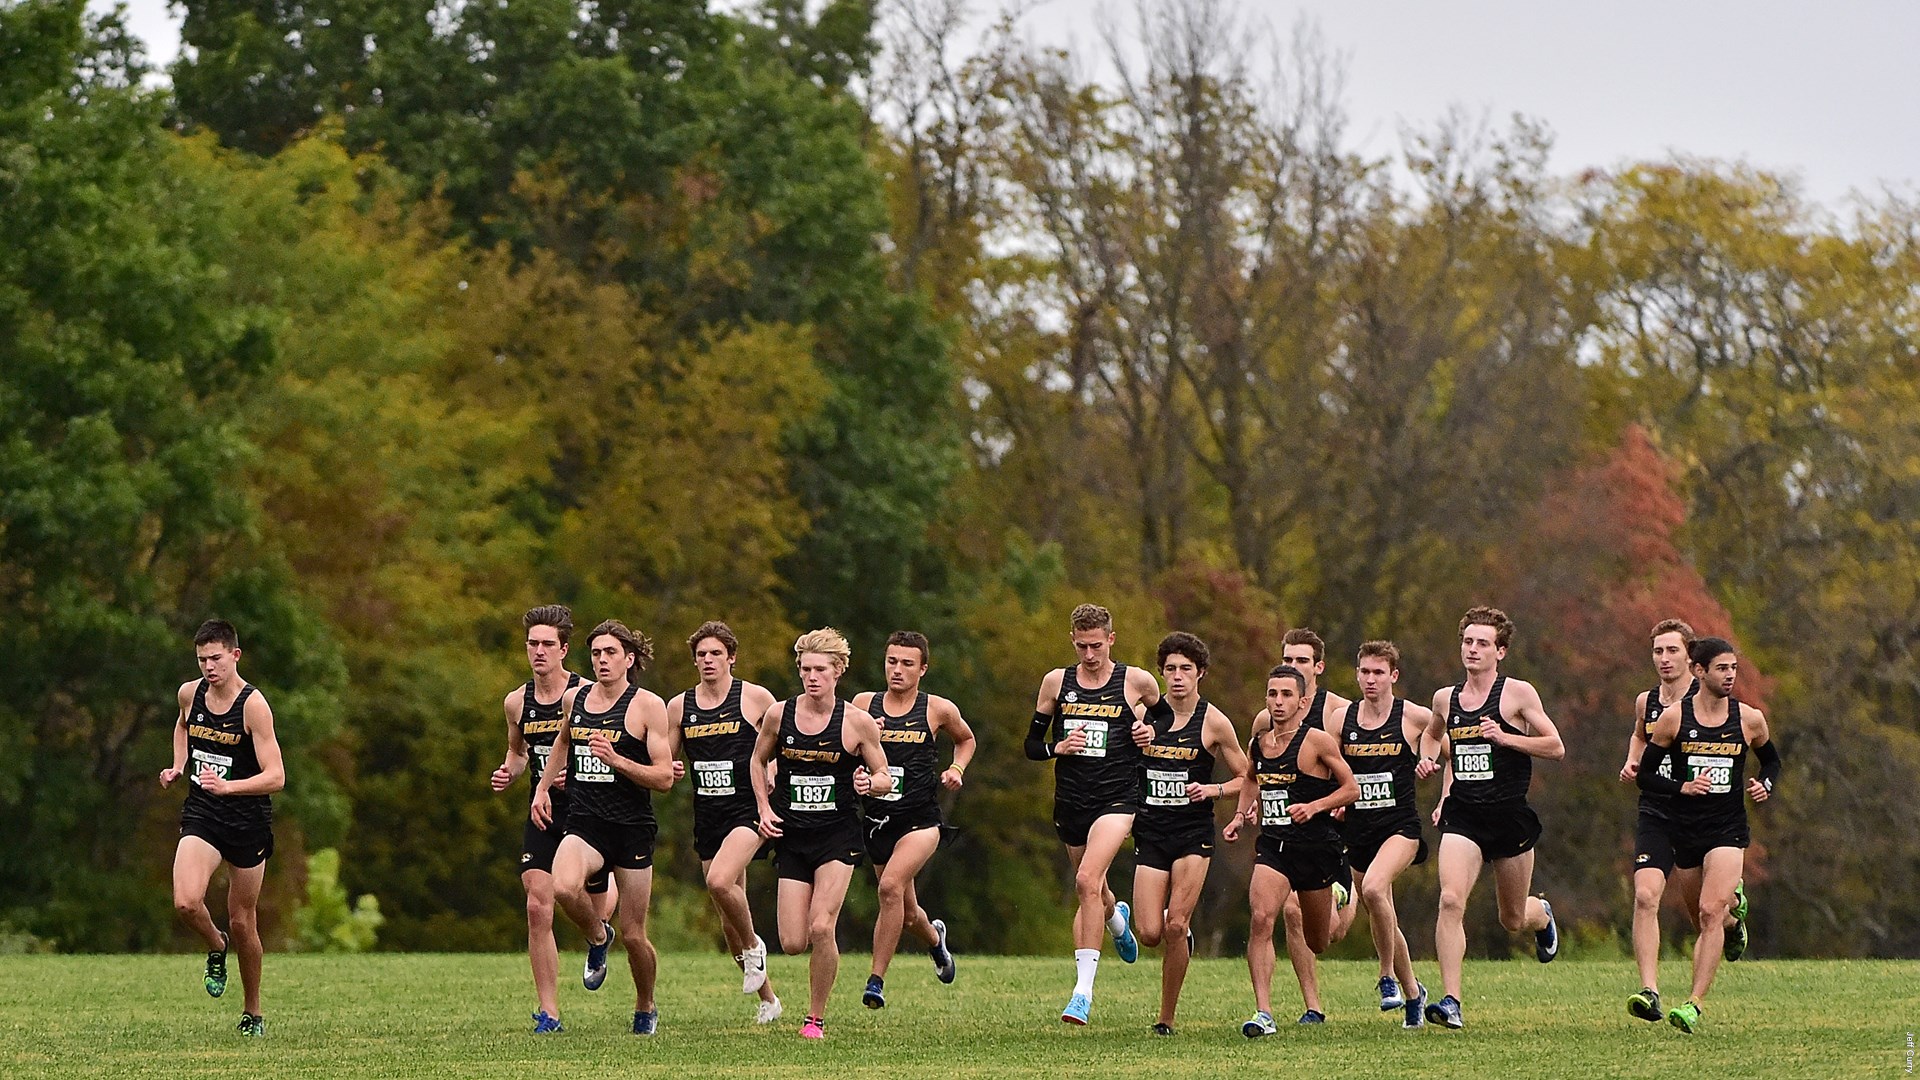 Mizzou Cross Country during the Gans Creek Classic Gans Creek Cross Country Course in Columbia, MO on October 3, 2020. (Photo by Jeff Curry)